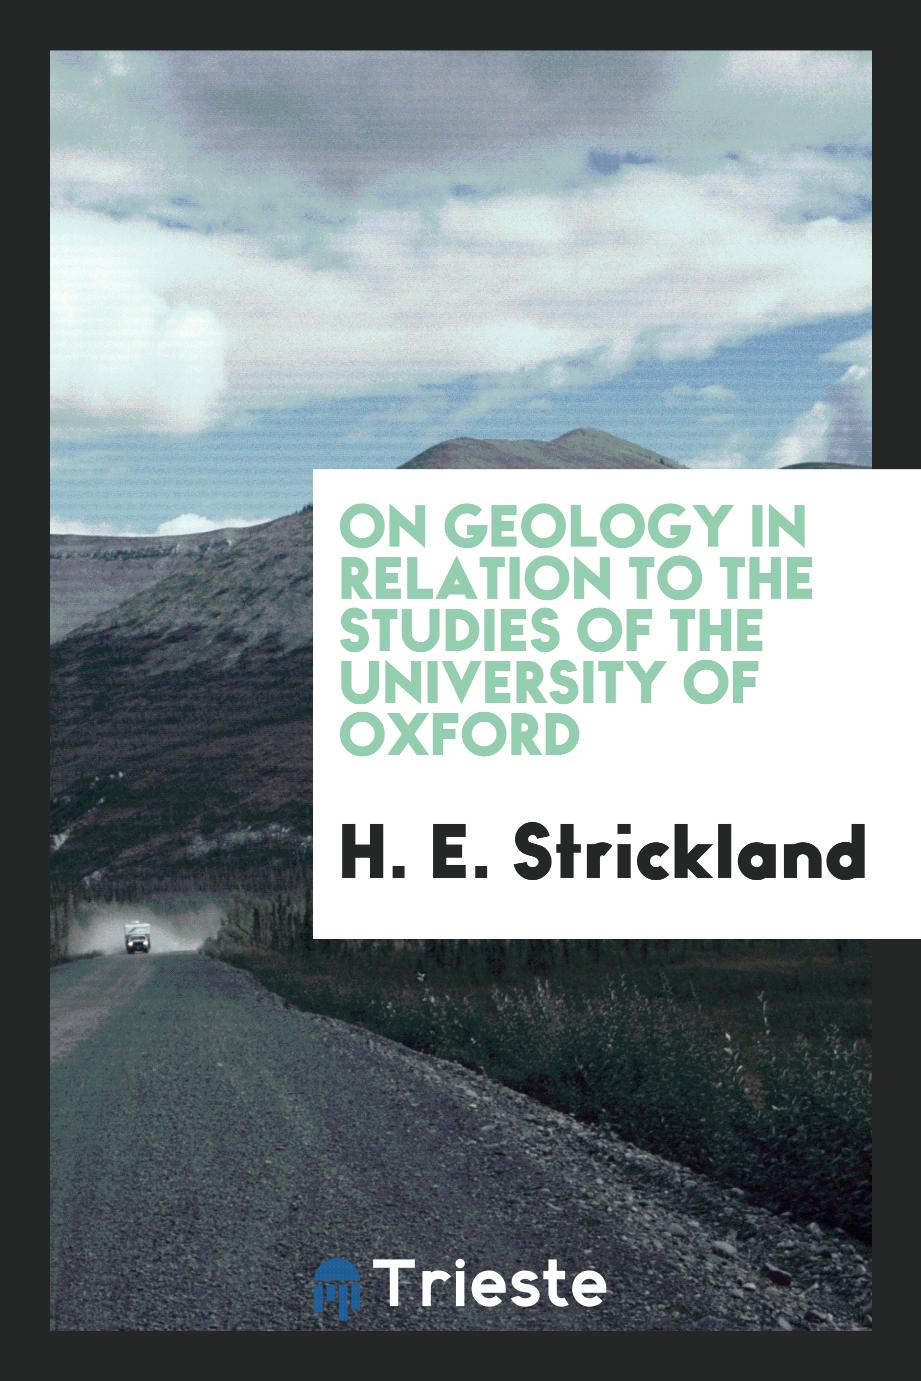 On geology in relation to the studies of the University of Oxford